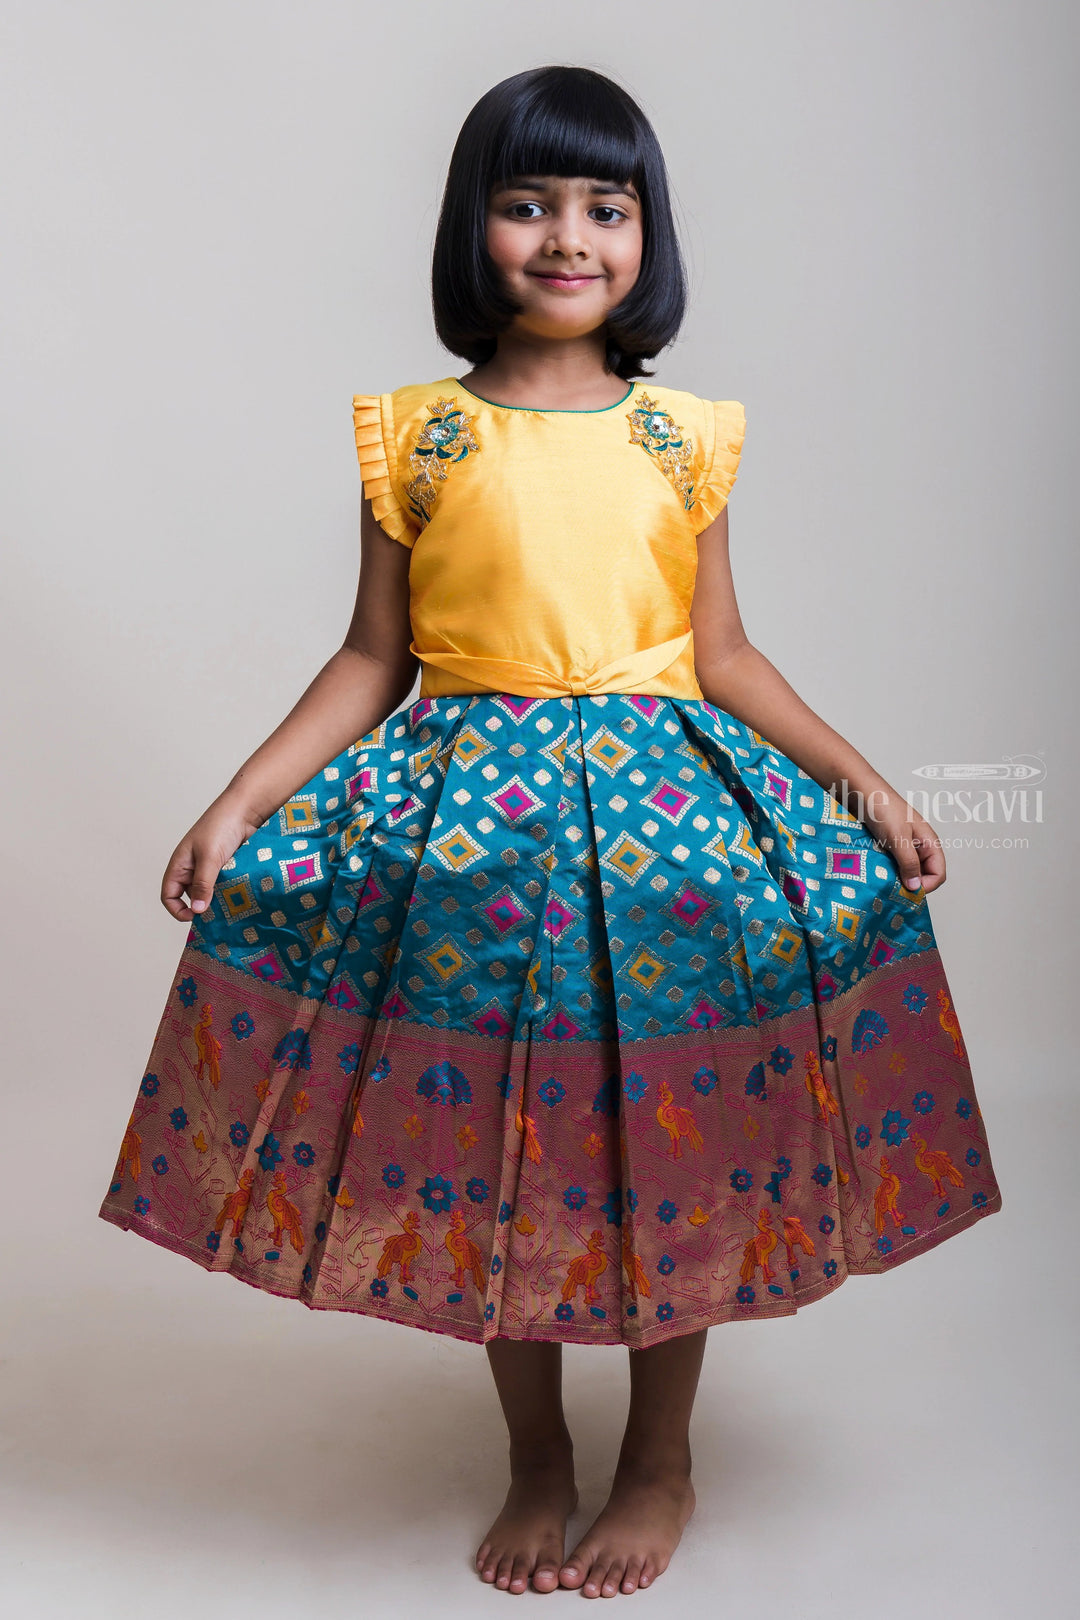 The Nesavu Silk Party Frock Embroidered Yellow Yoke And Copper-Toned Zari Border Silk Frocks For Girls Nesavu 16 (1Y) / Blue SF485A-16 Ruffled Sleeves Silk Frock Collection| Pongal Special Arrival| The Nesavu